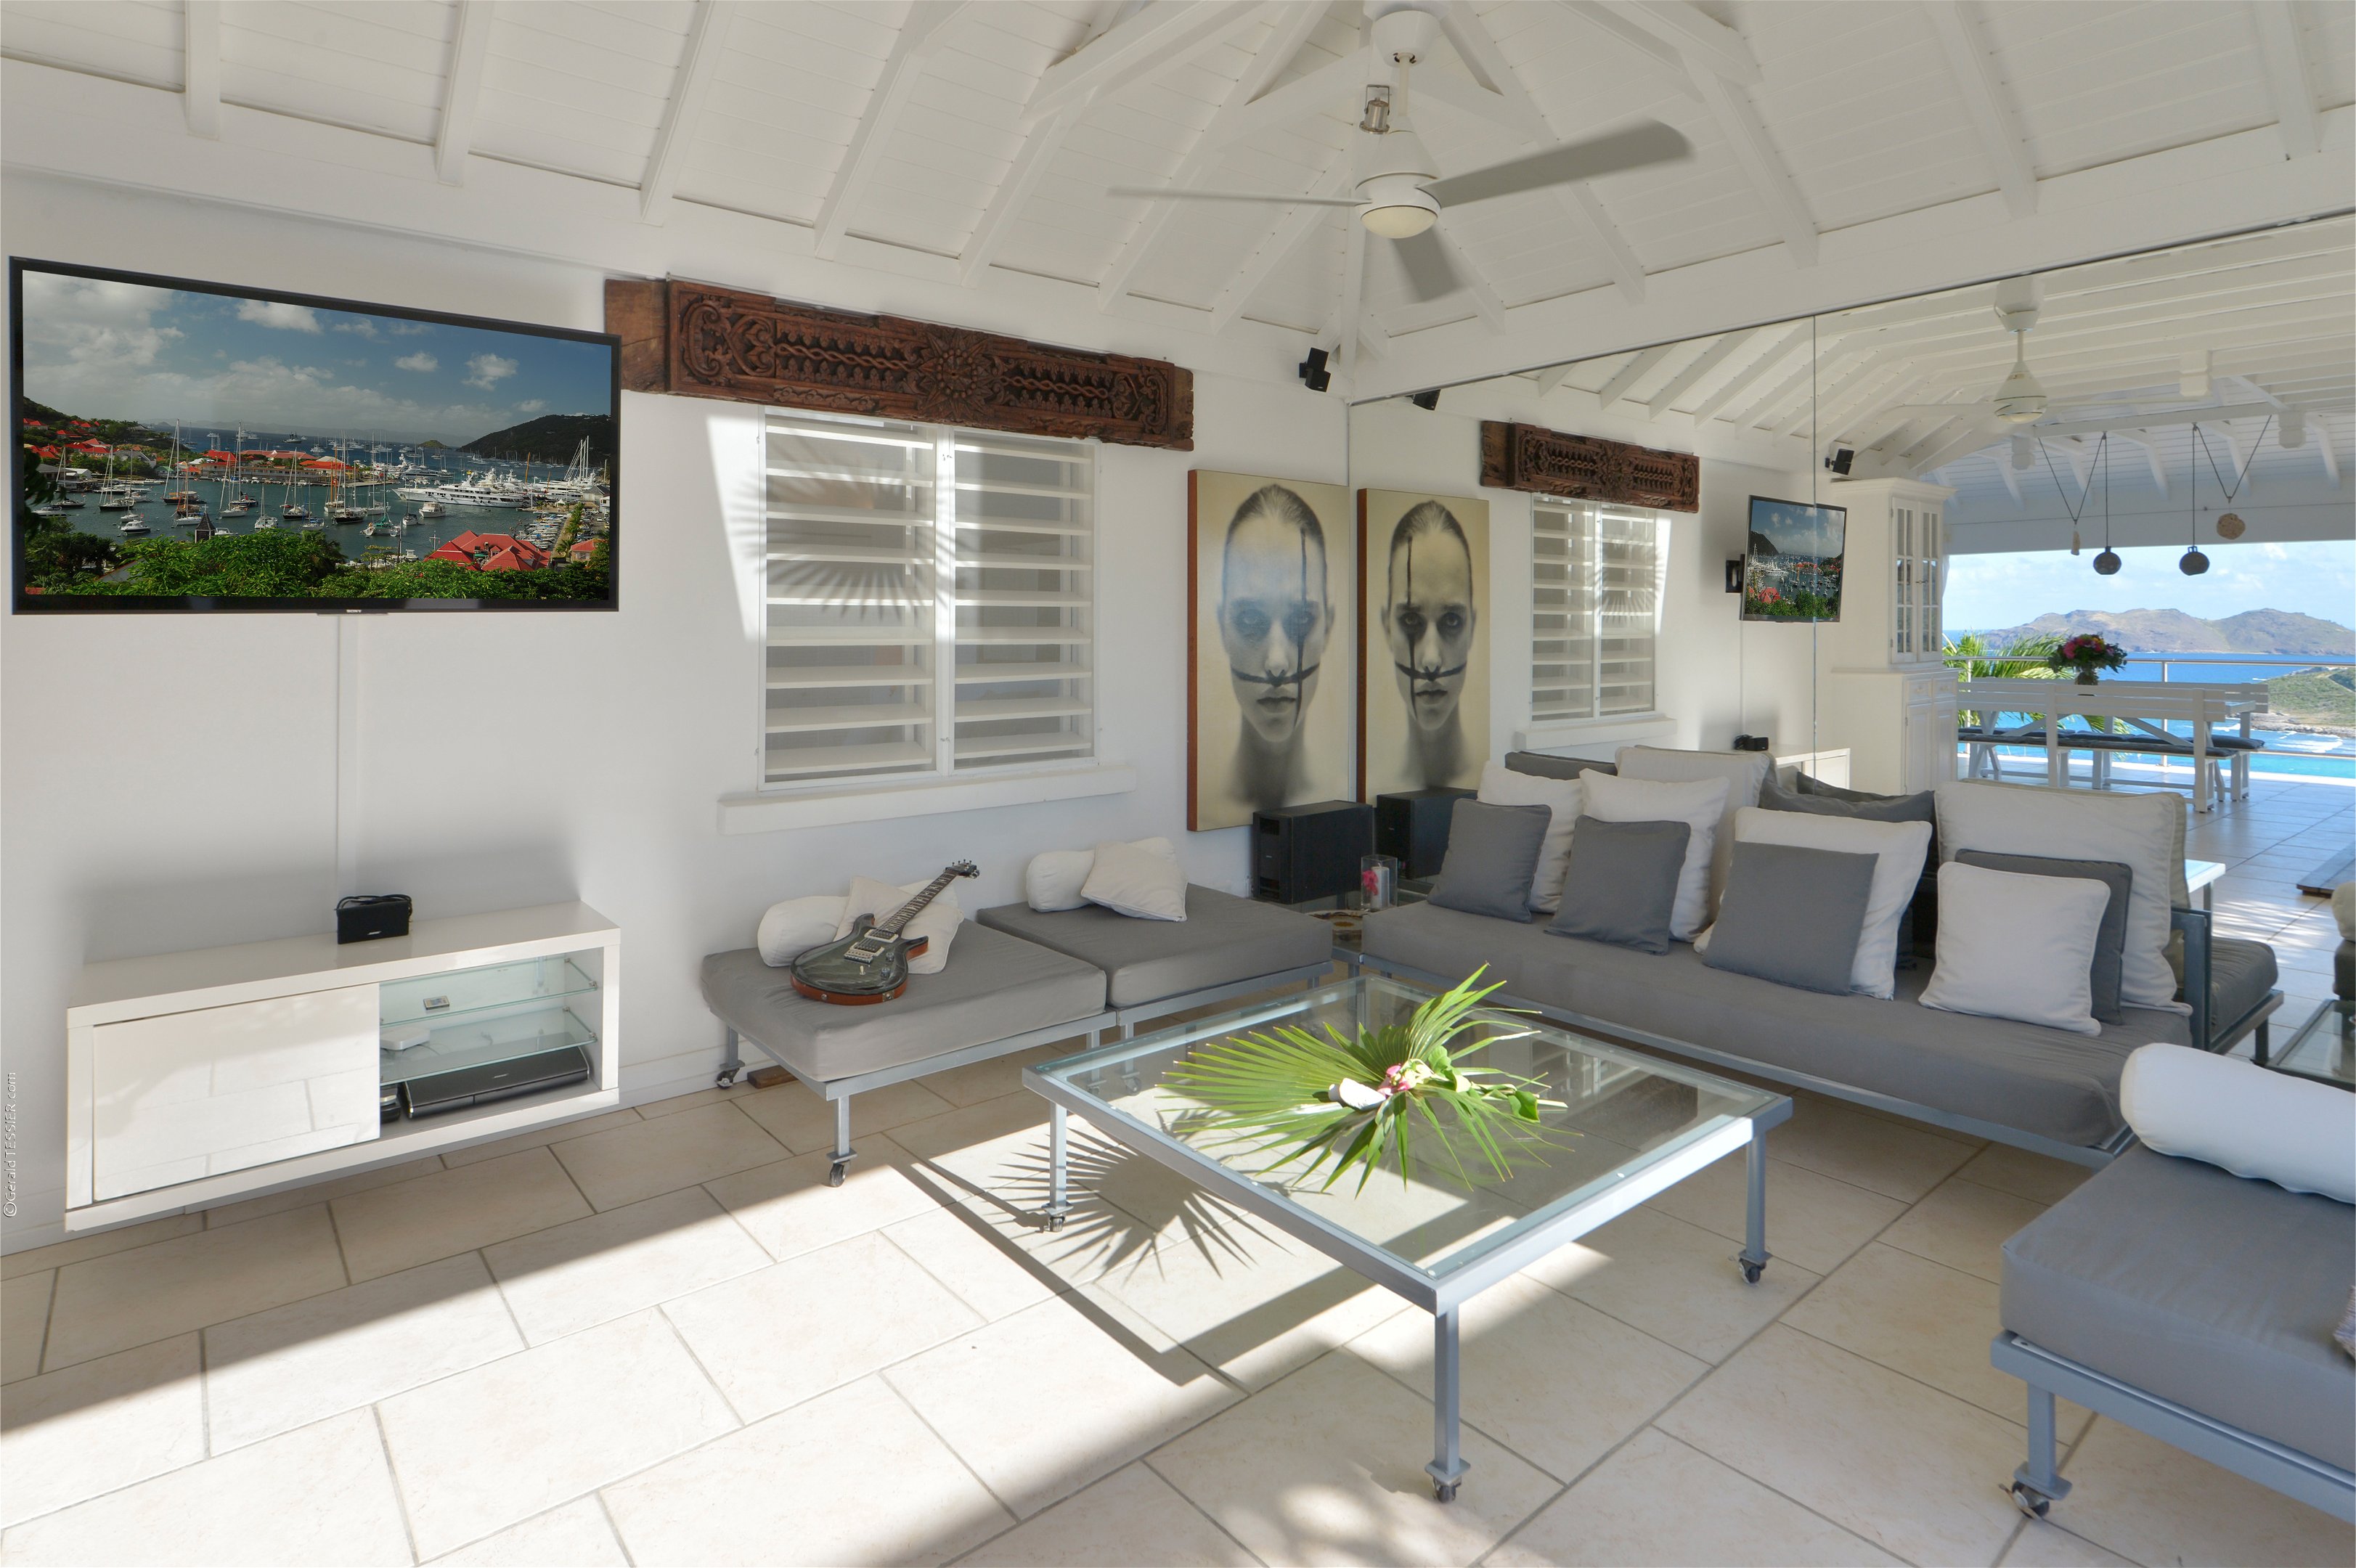 Located at the entrance of the villa, the comfortable living is furnished with a nice mixed of antiques, Ceiling fan & nice natural breeze. HD-TV with Canal Satellite, DVD player. A second living area is located by the pool. 